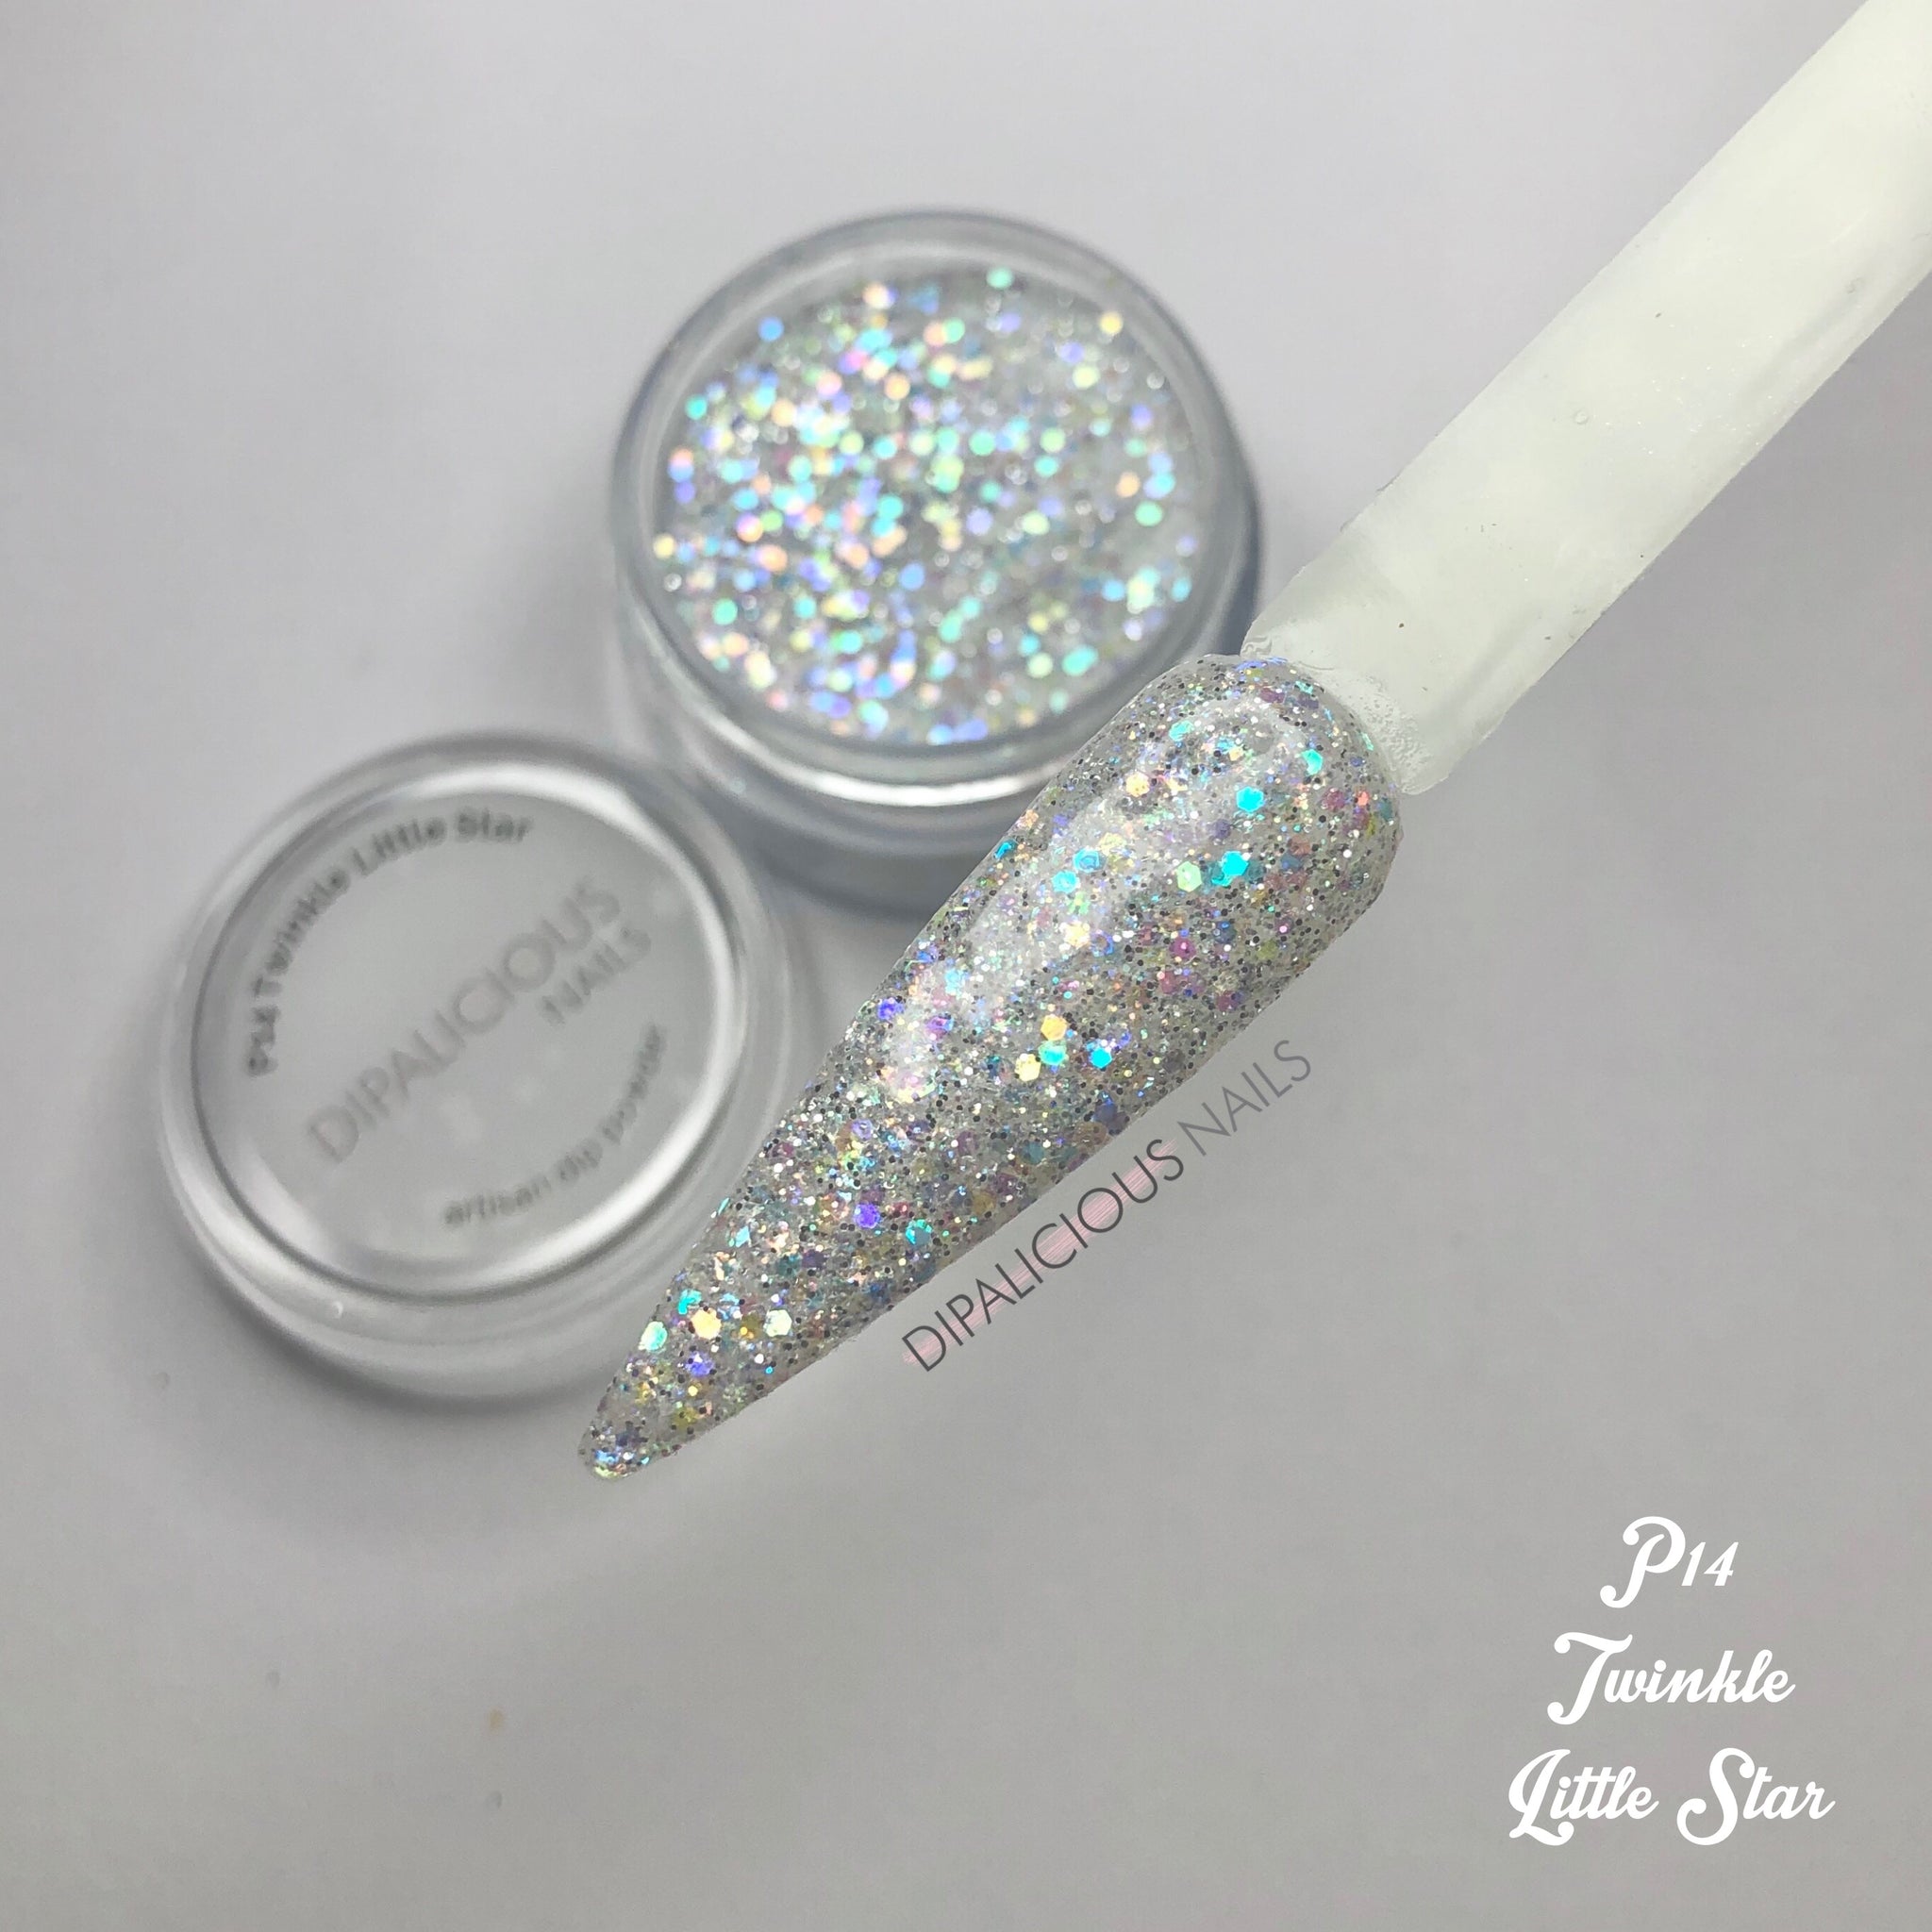 Dip: Twinkle Little Star – DIPALICIOUS NAILS